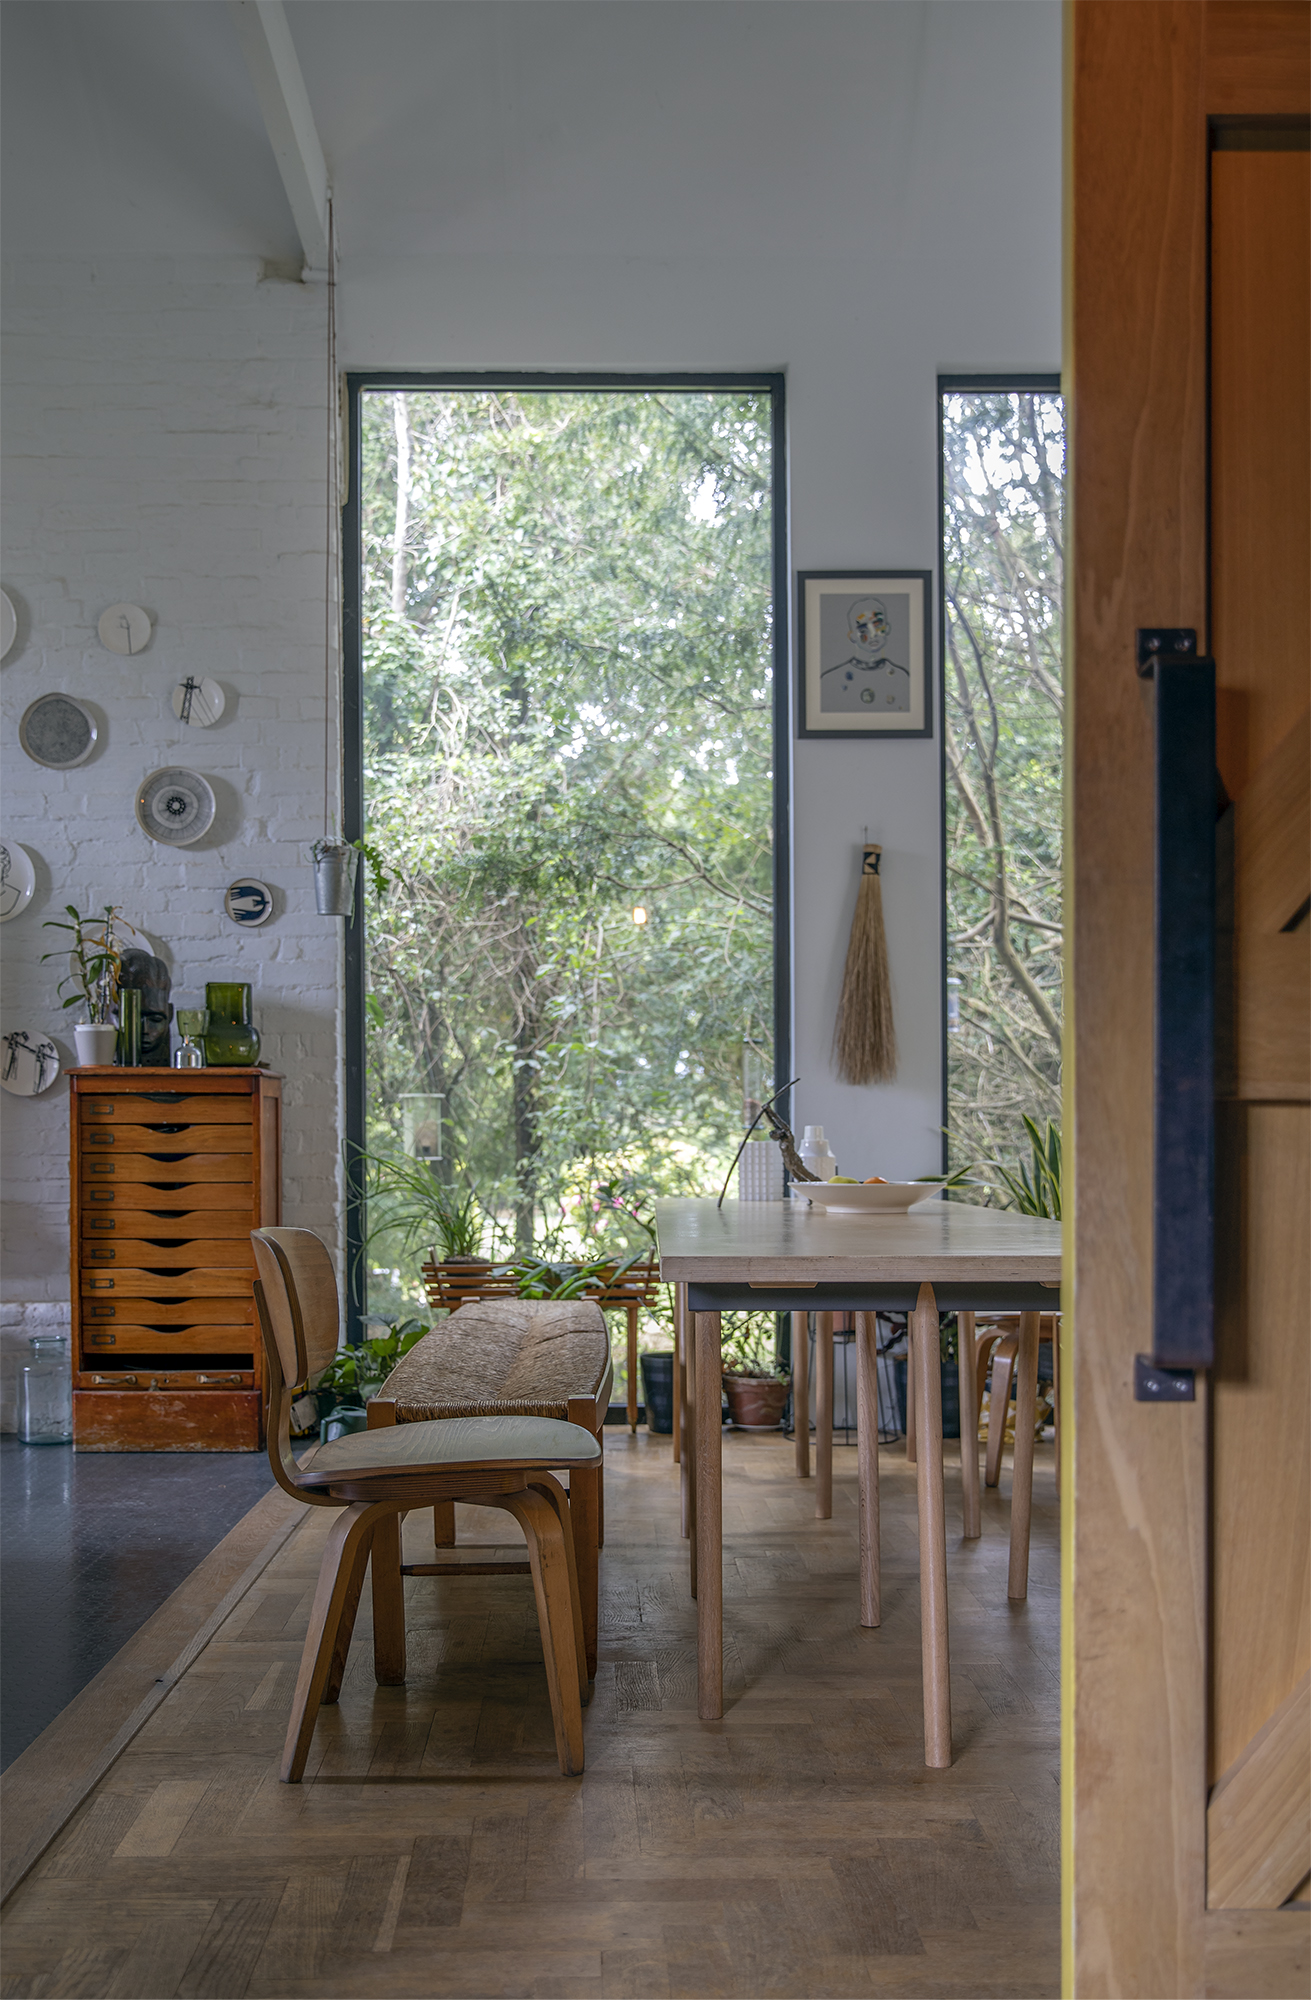 Photography piece showing a light and airy shot of an interior.